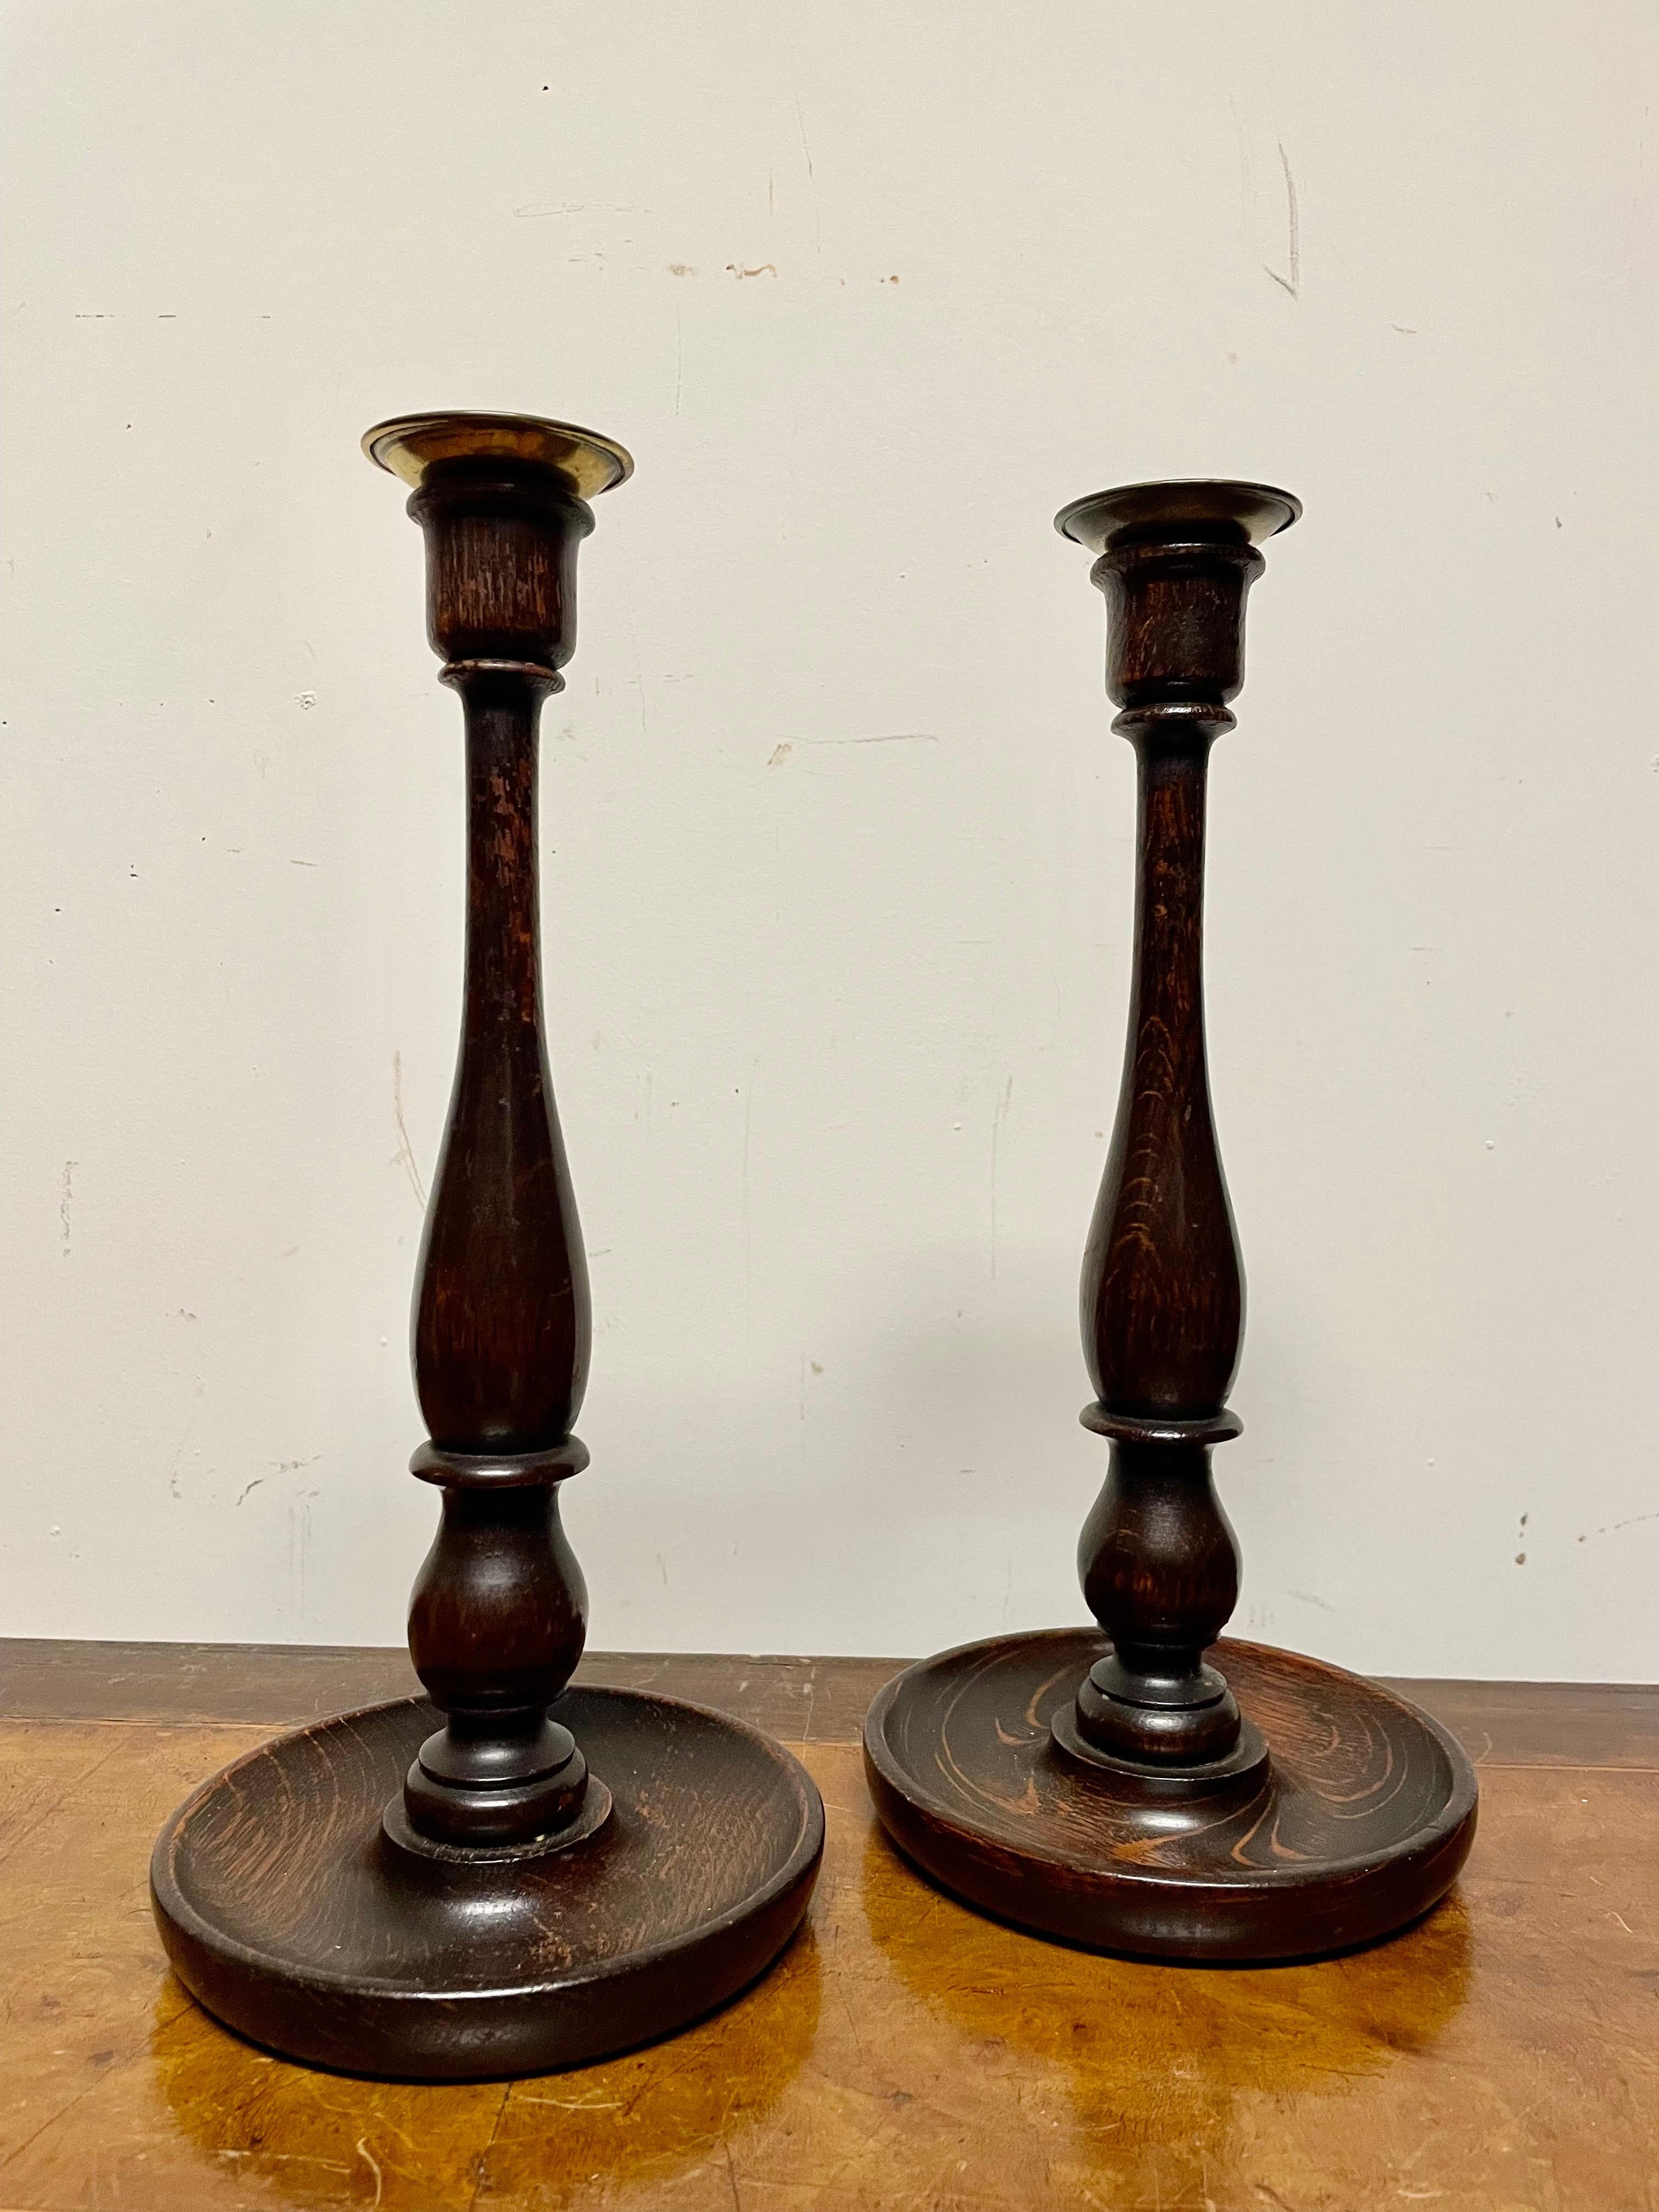 Pair of English Edwardian period hand turned Elm wood candlesticks with brass bobeche. Quite the handsome pair, reasonably priced, will make a great gift. 
Measures: 12 inches high, 5.75 diameter. 
Provenance: Phipps Family Estate, Long Island, NY.